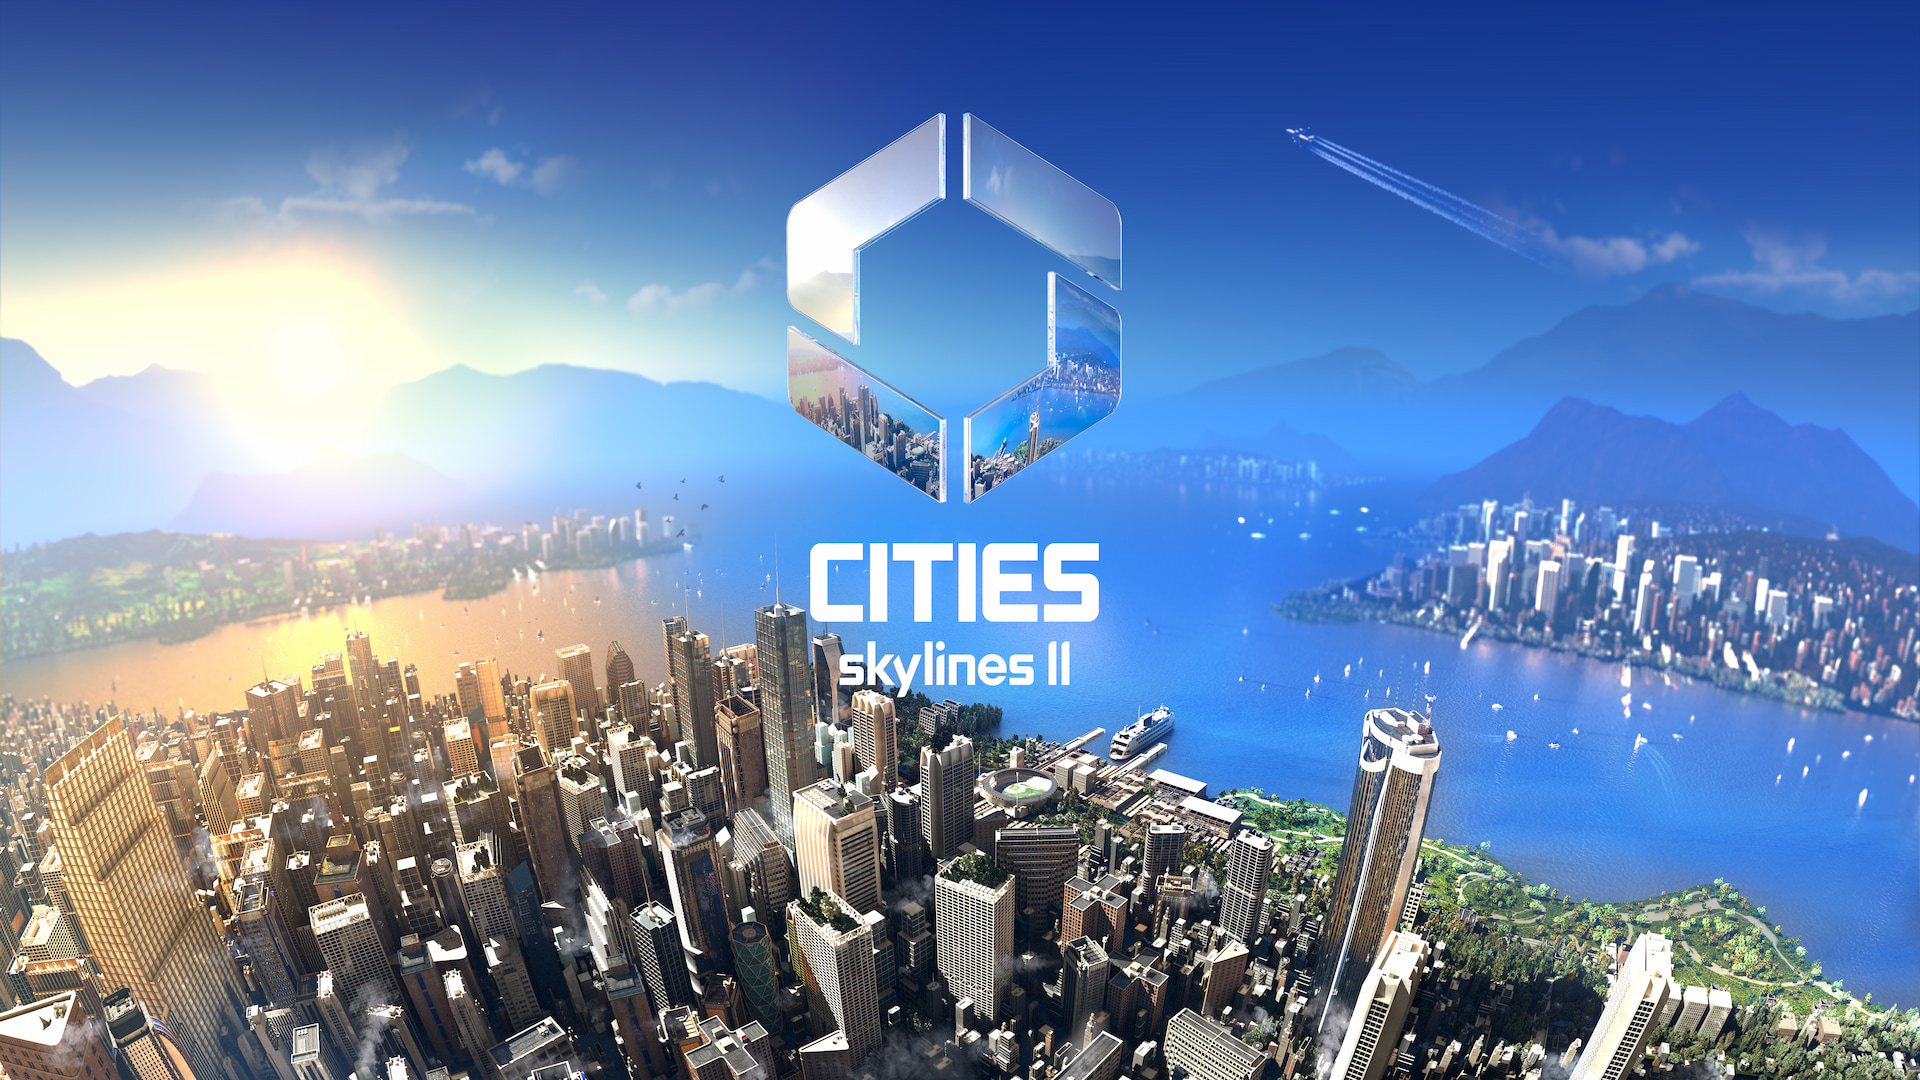 Cities: Skylines 2 Release Date Set For October 24 - Insider Gaming